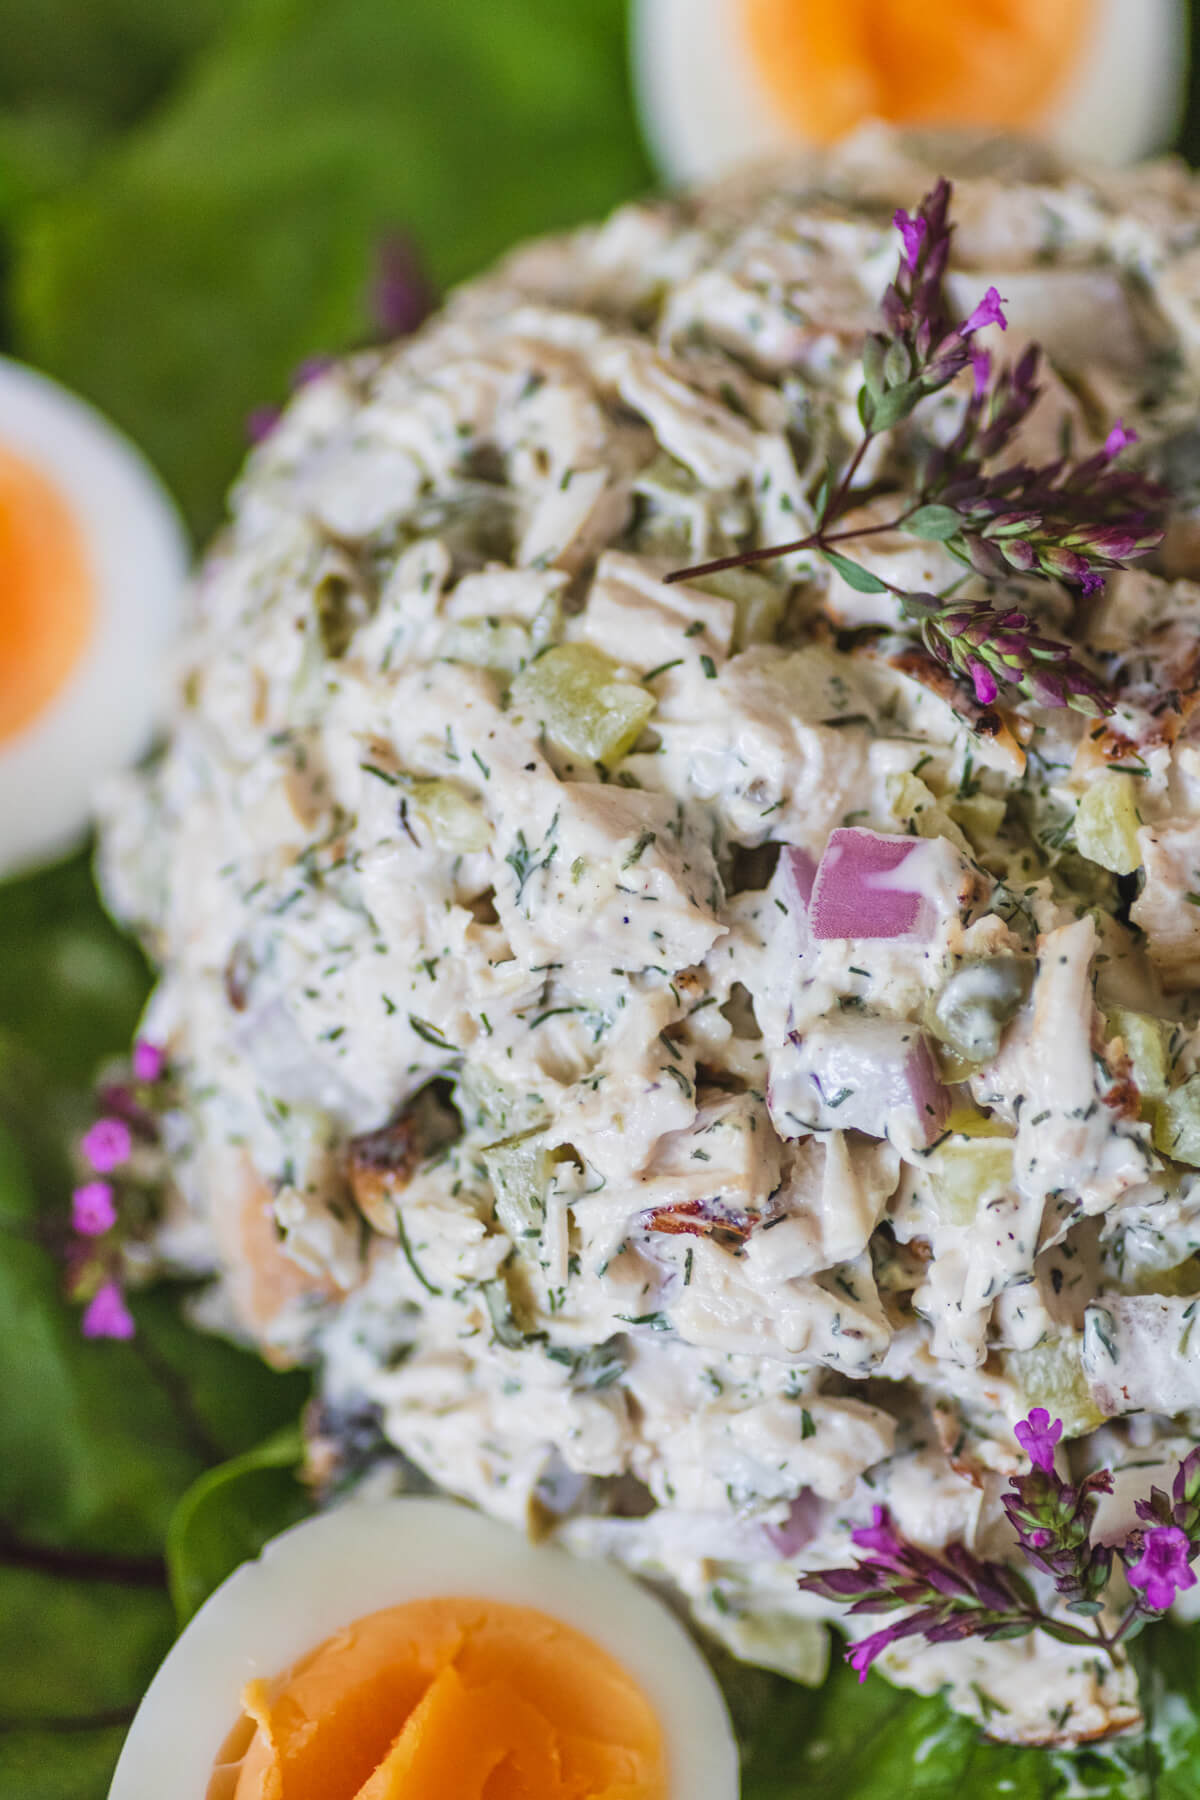 Close up view of chicken egg salad featuring dill weed, pickles, purple onions, and capers.